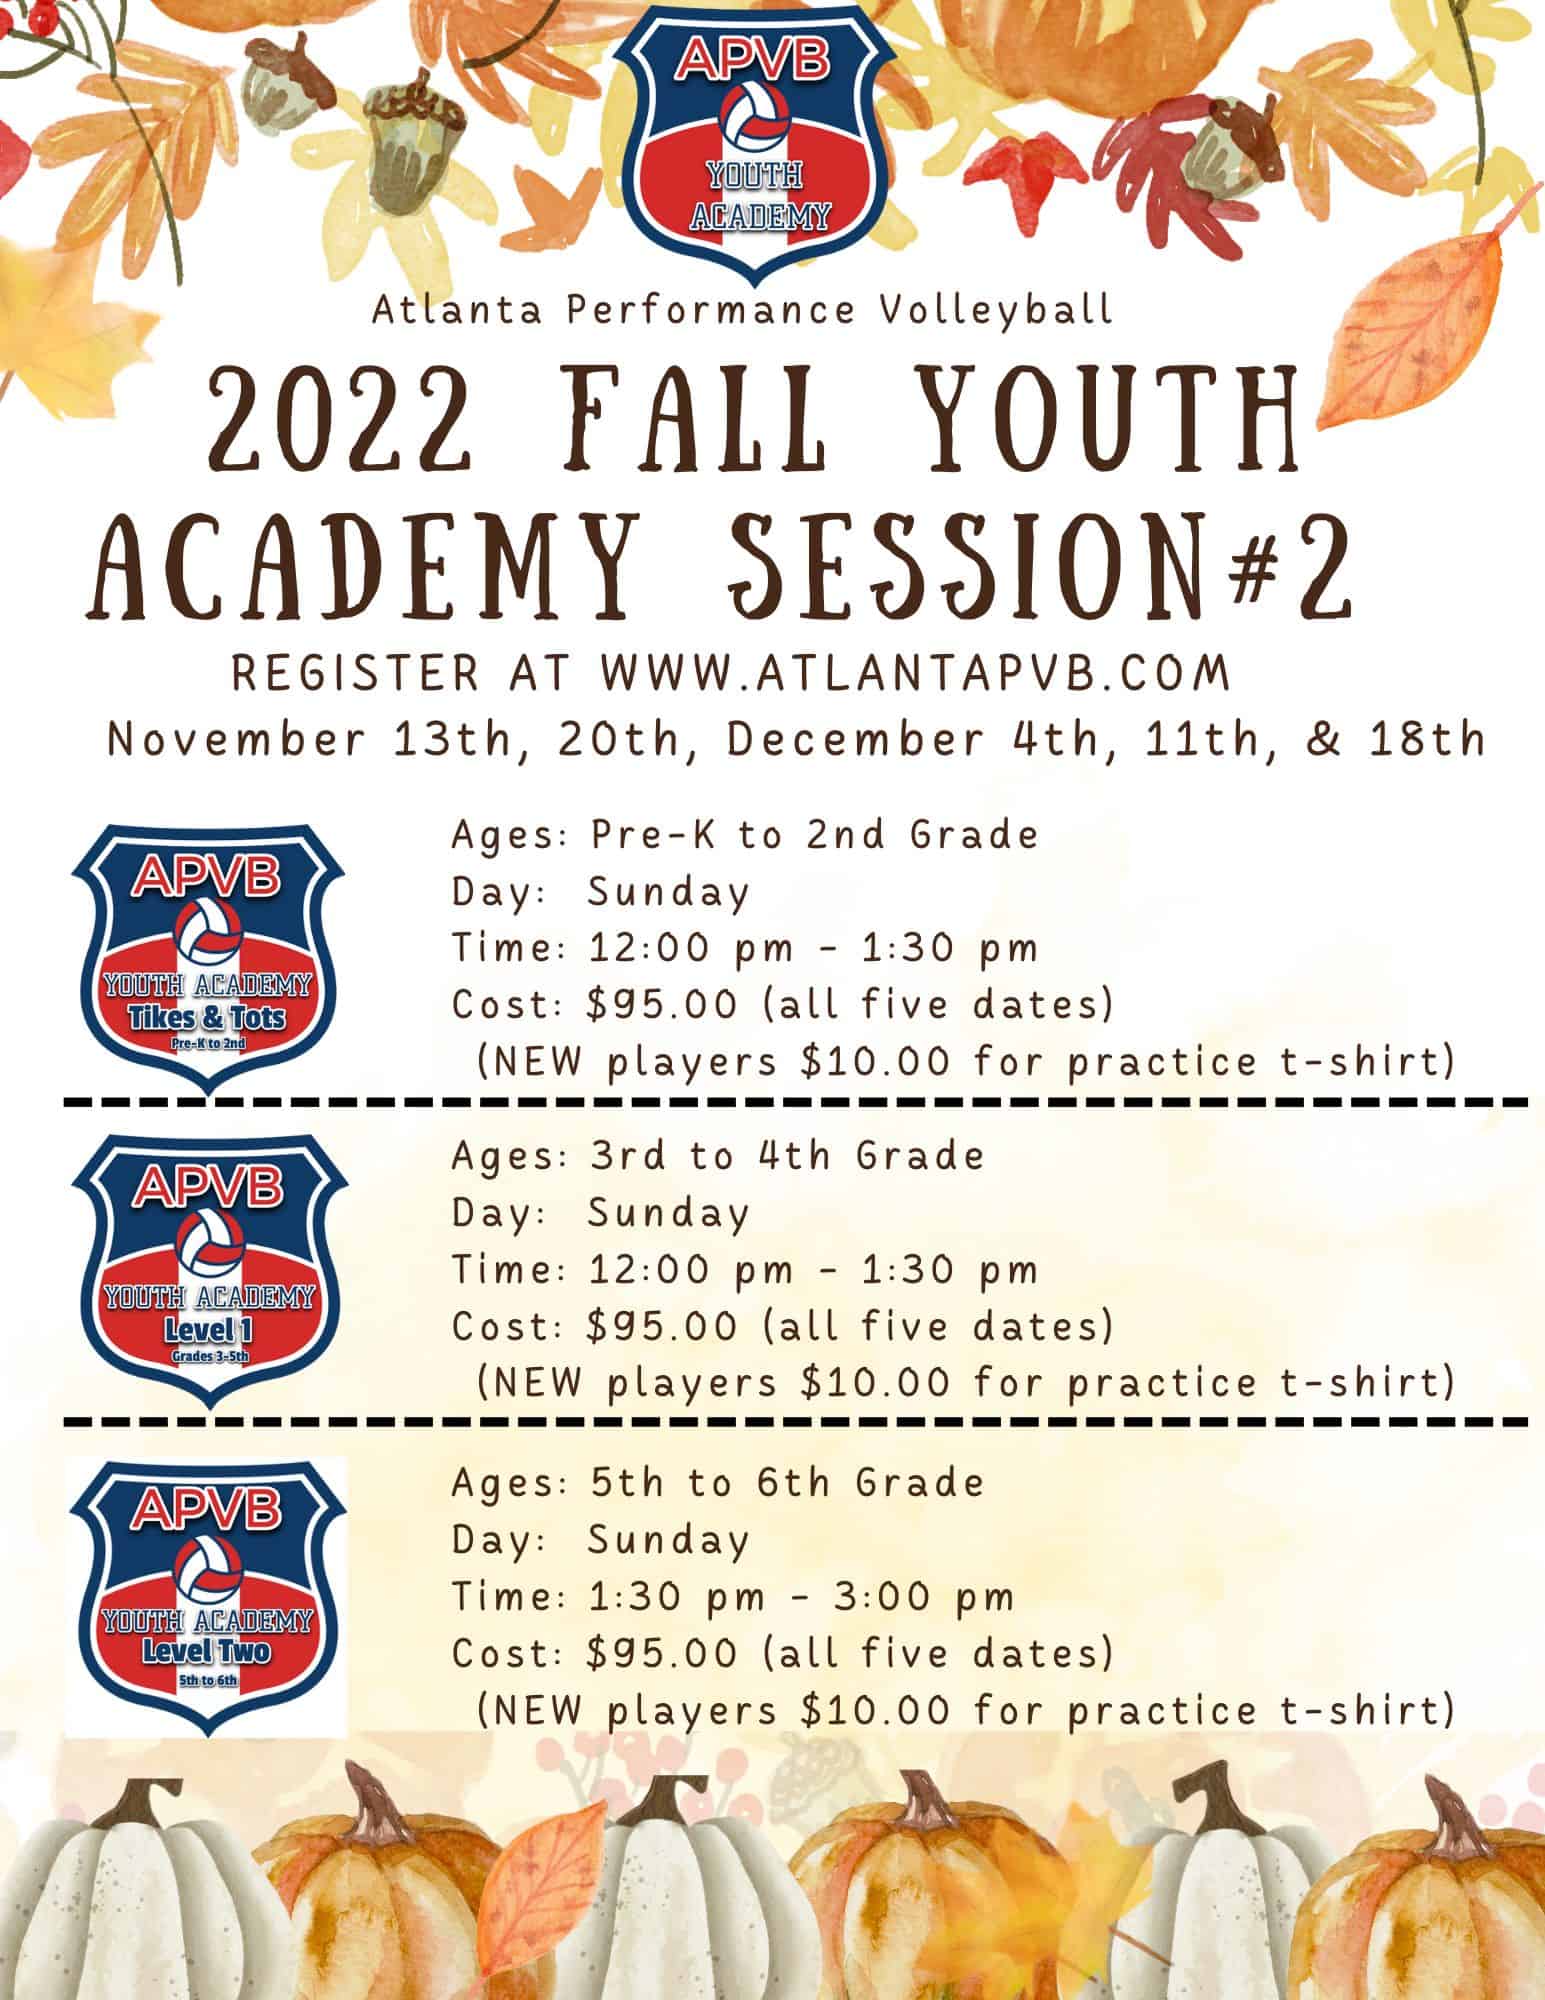 Youth Academy Fall Session #2